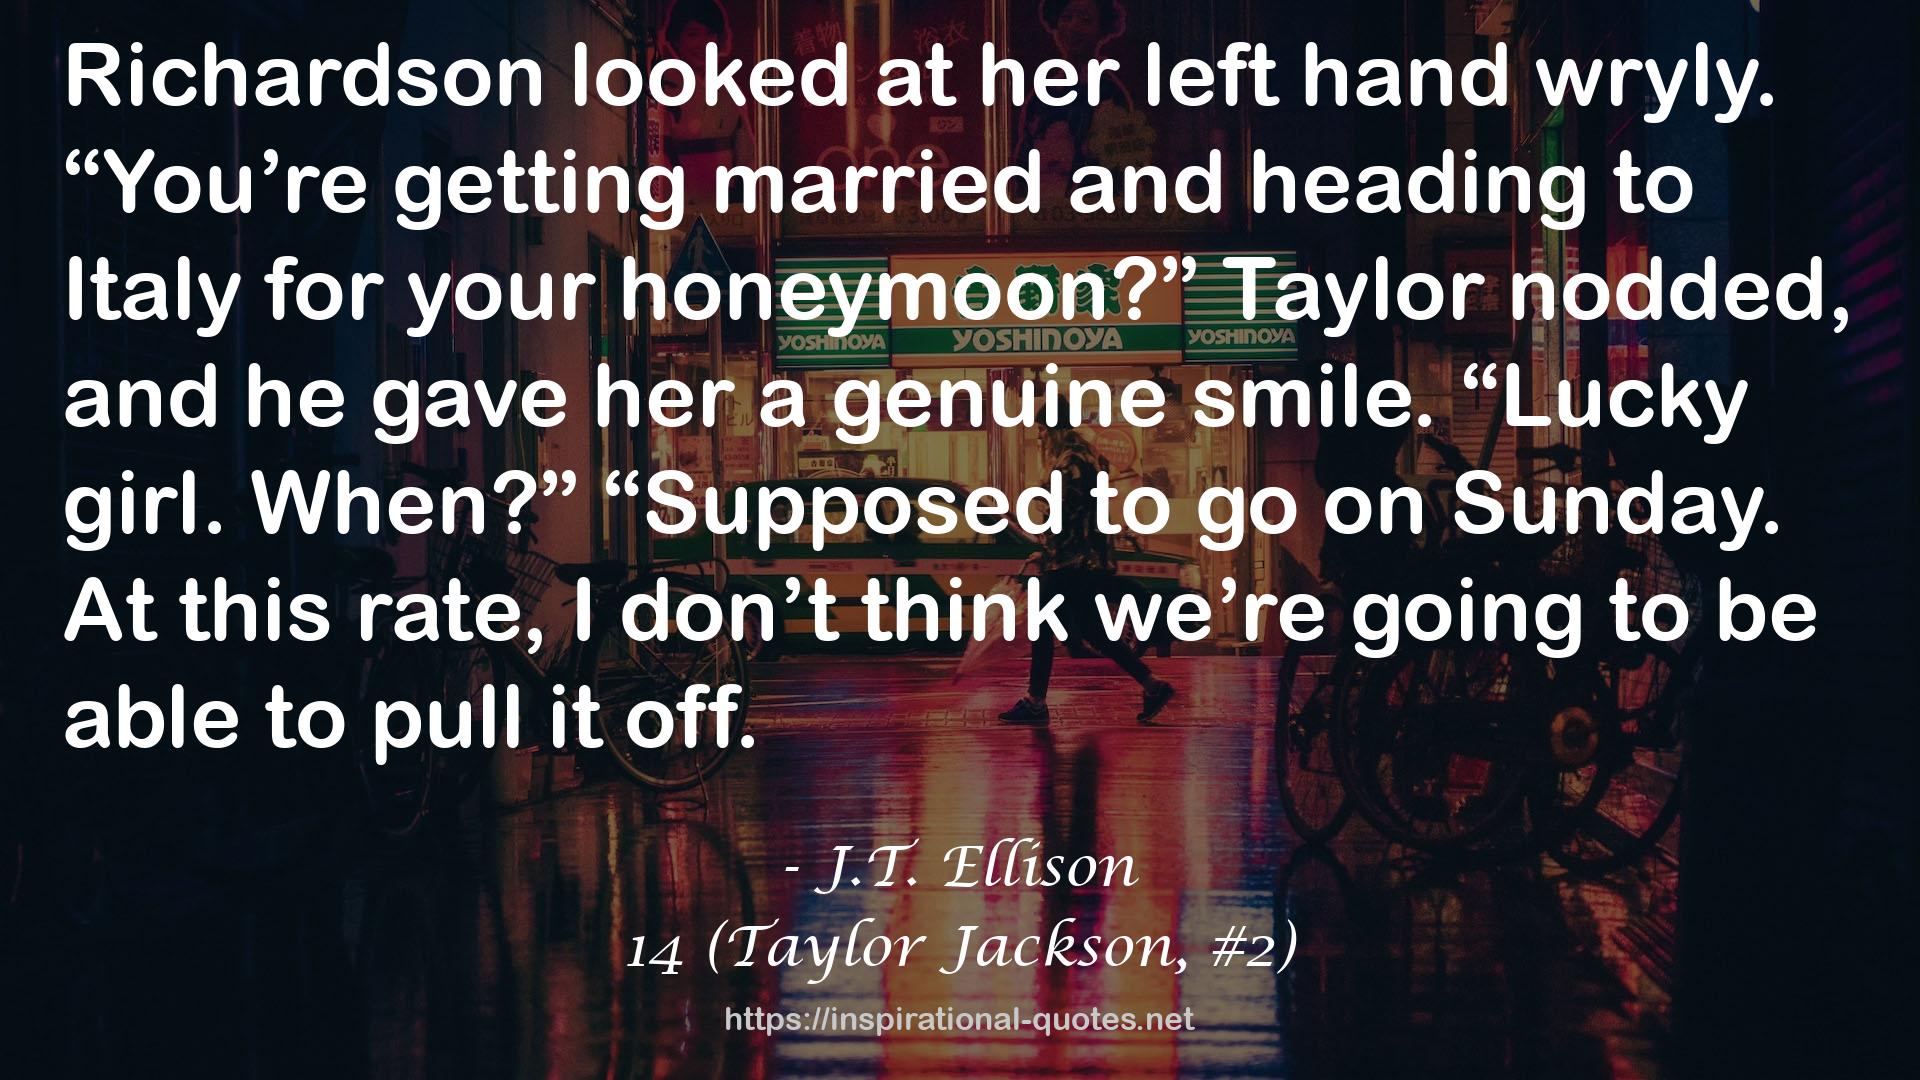 14 (Taylor Jackson, #2) QUOTES